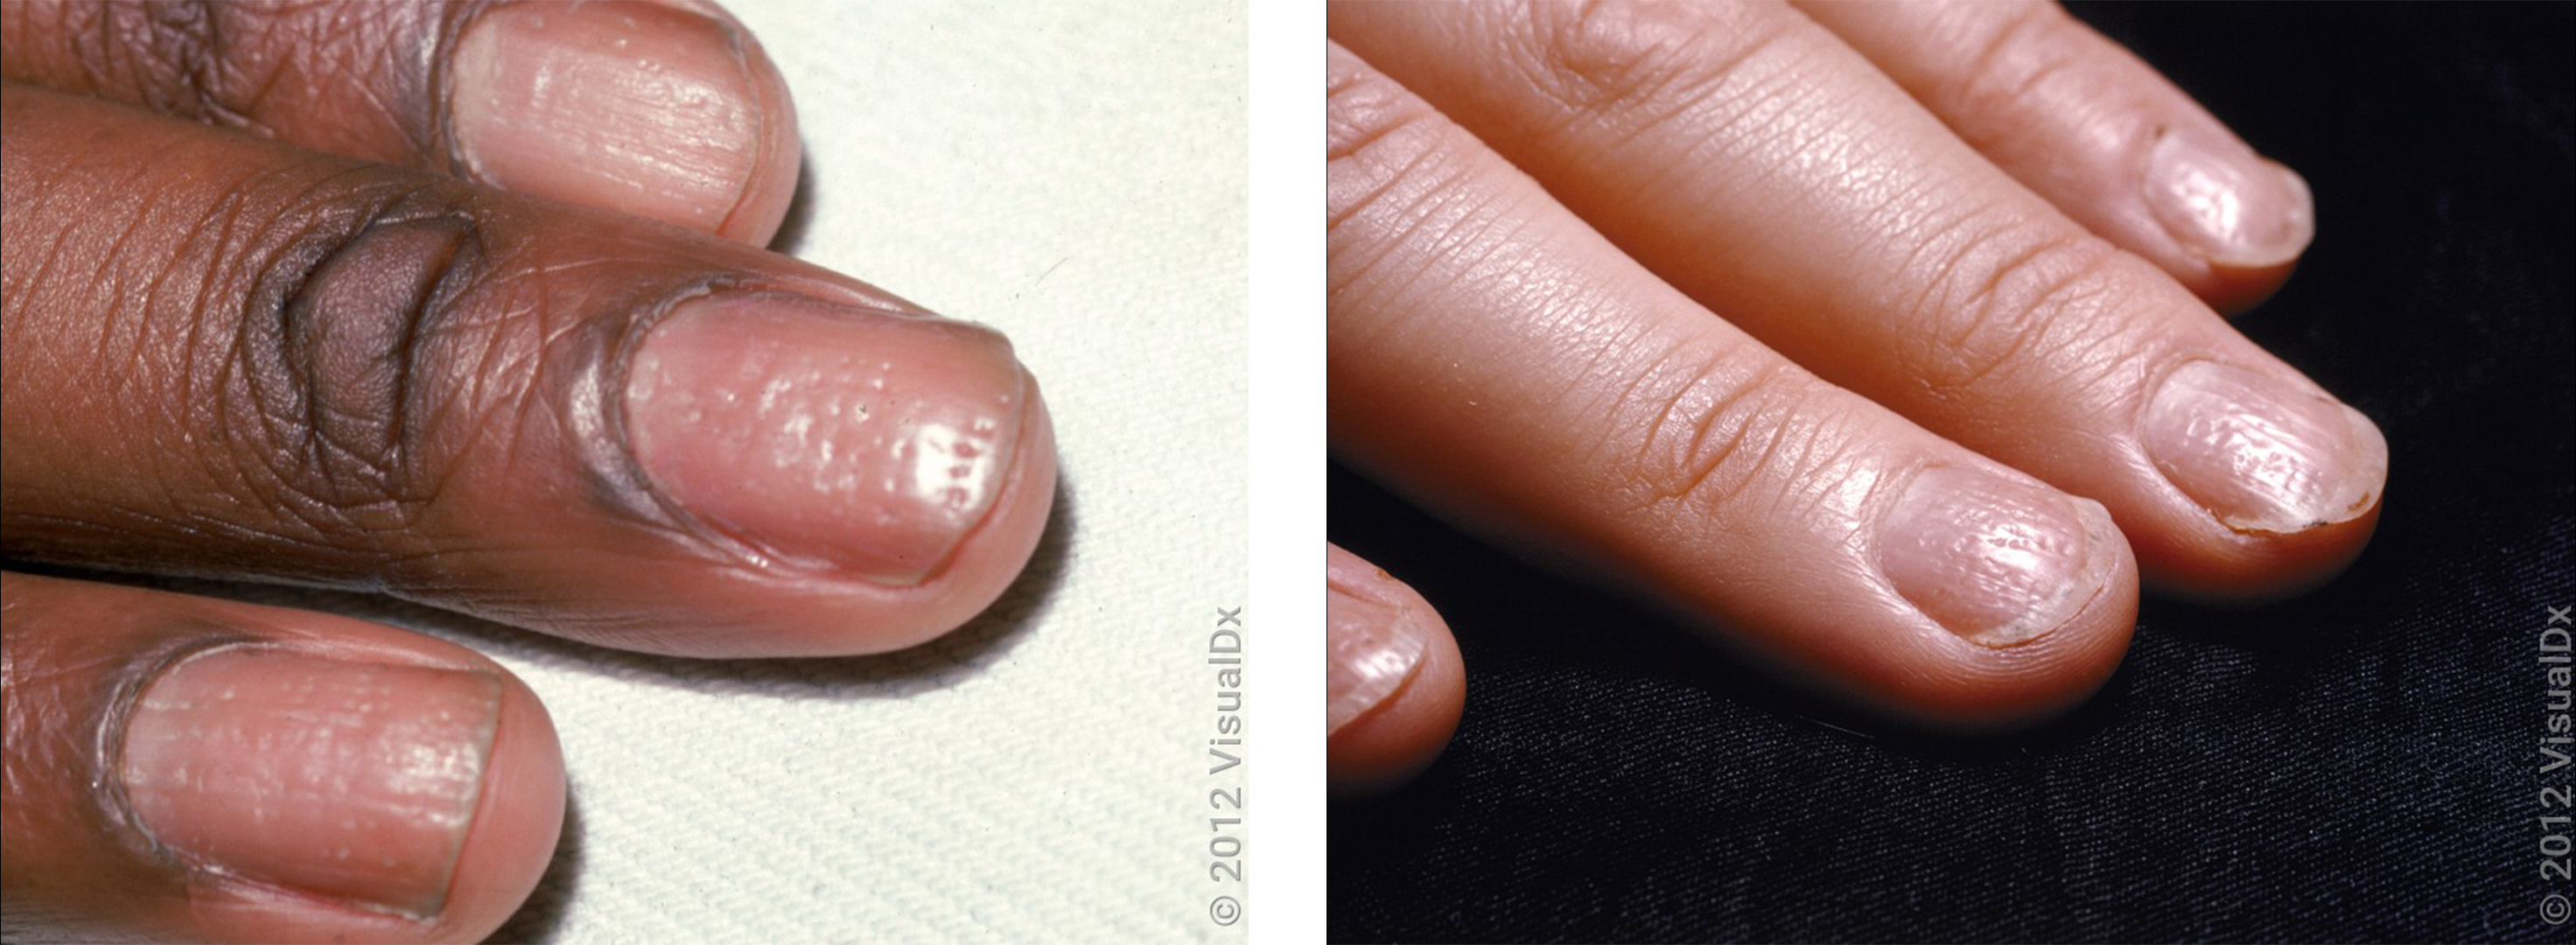 Nail Psoriasis Vs Fungus - Causes, Symptoms & Best Homeopathic Medicines